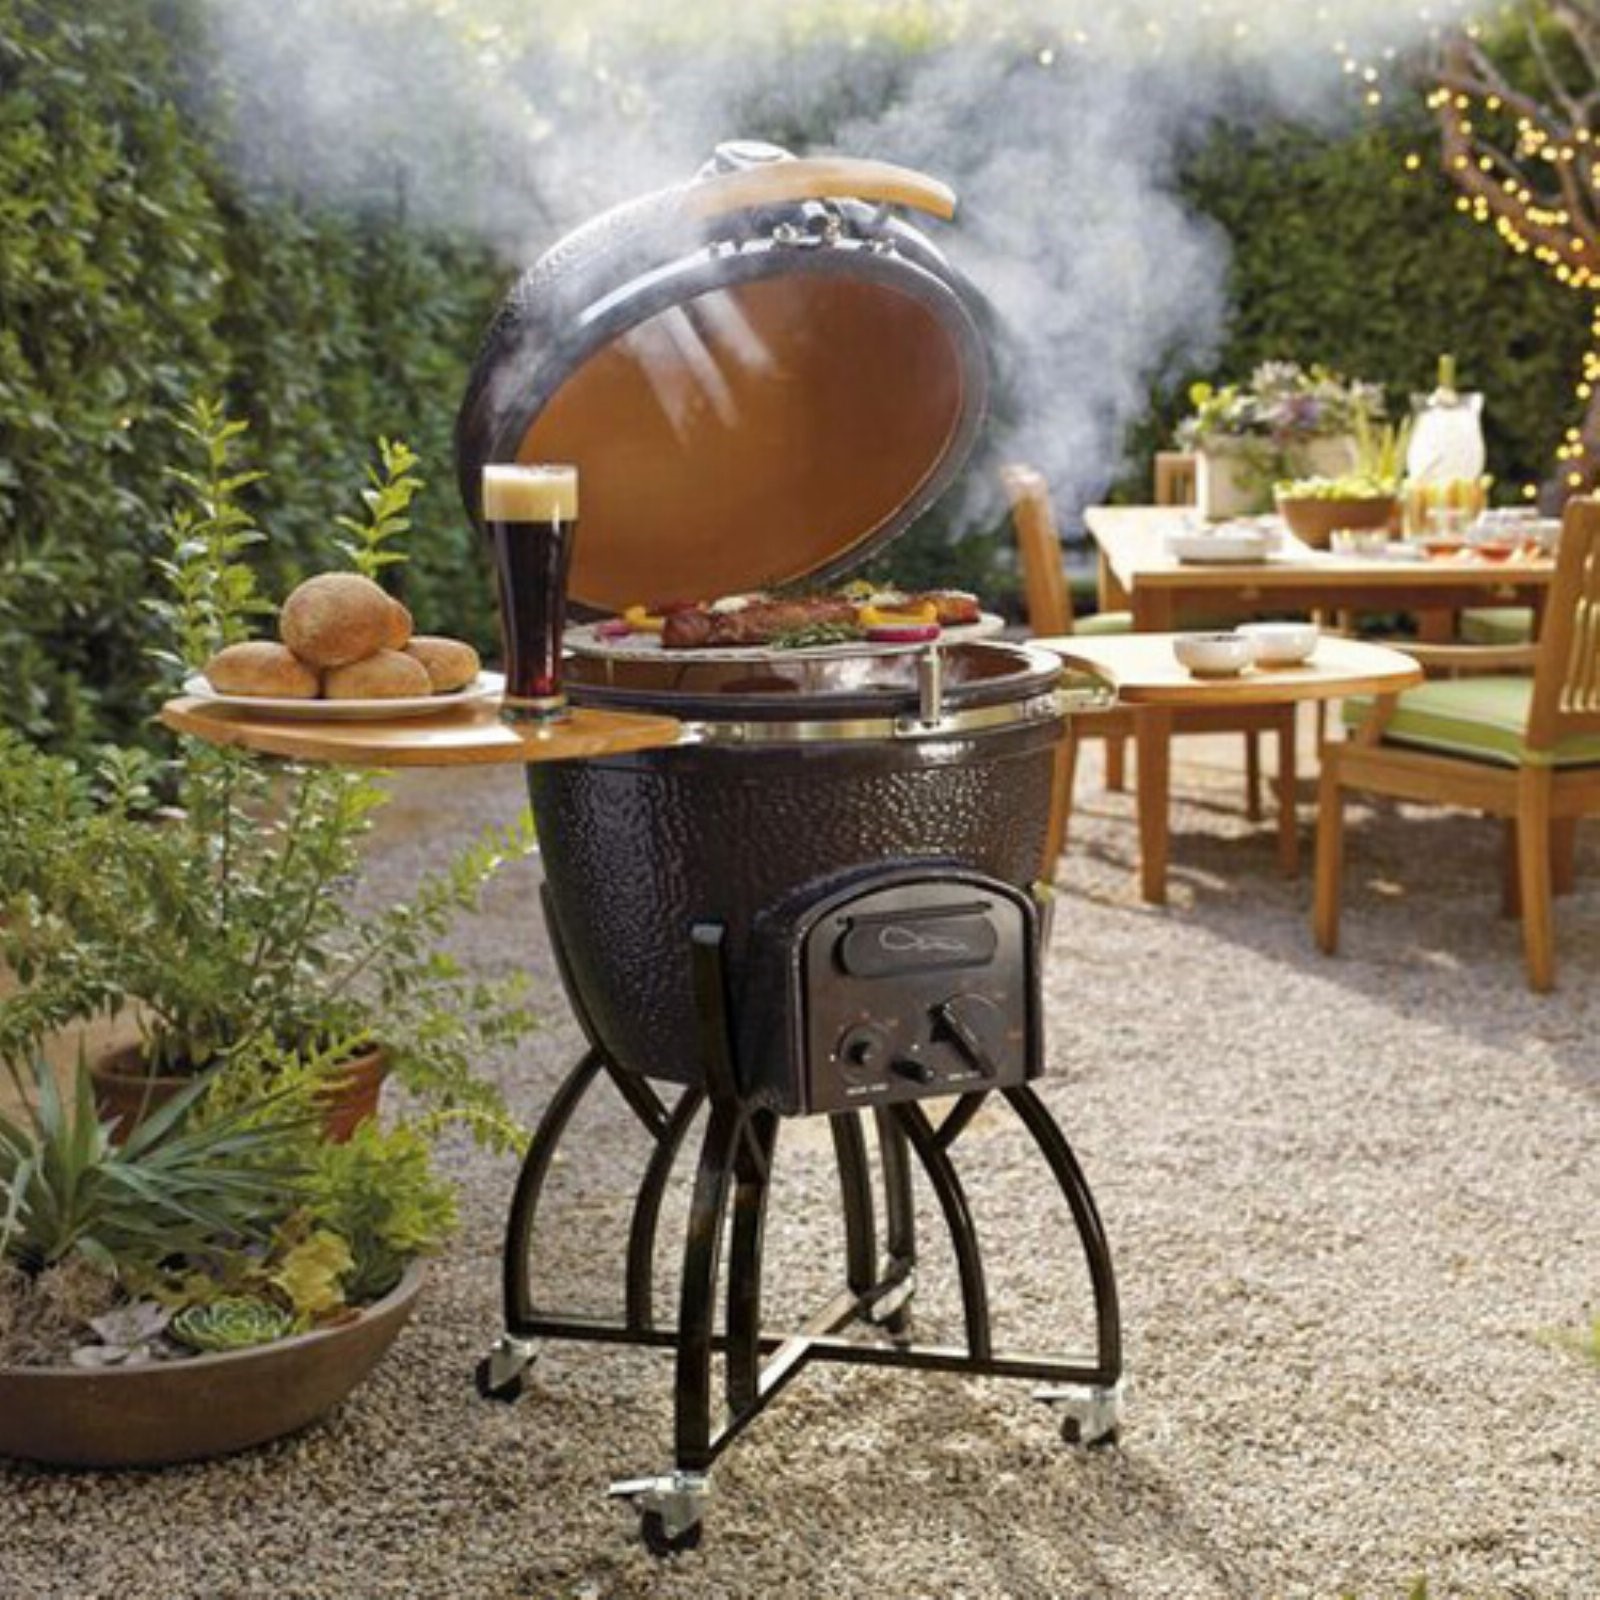 Check out Top 5 Kamado Grills are Value for Money at https://diyprojects.com/top-5-kamado-grills-are-value-for-money/